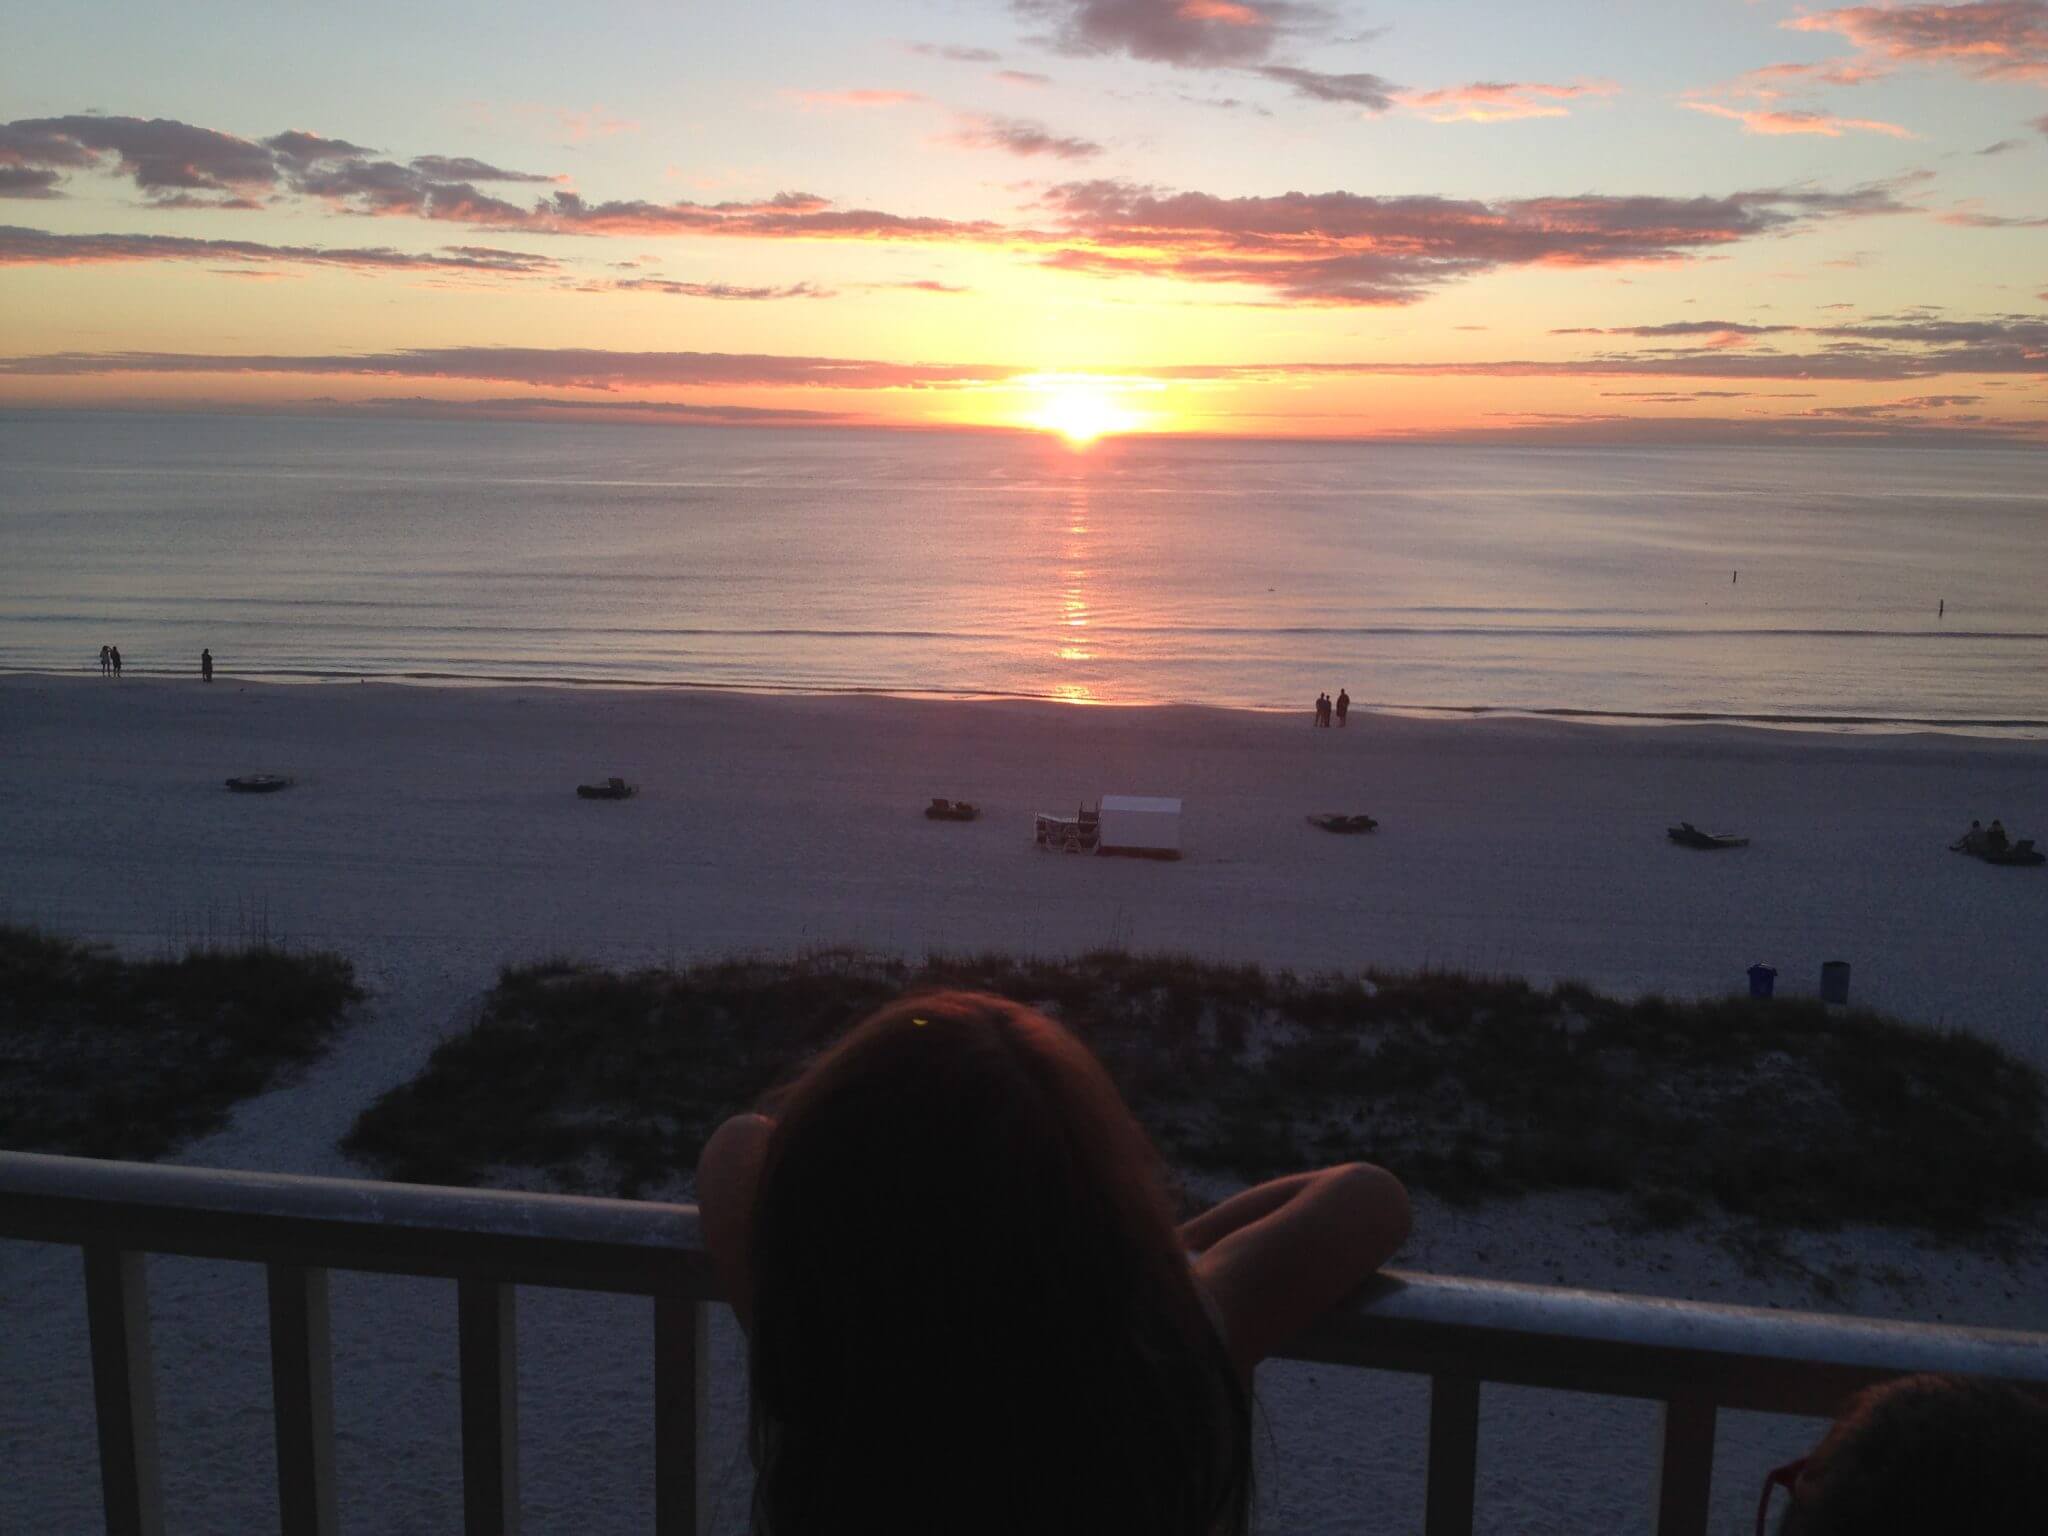 Watching the Sunset from our a hotel balcony in Treasure Island, Florida.